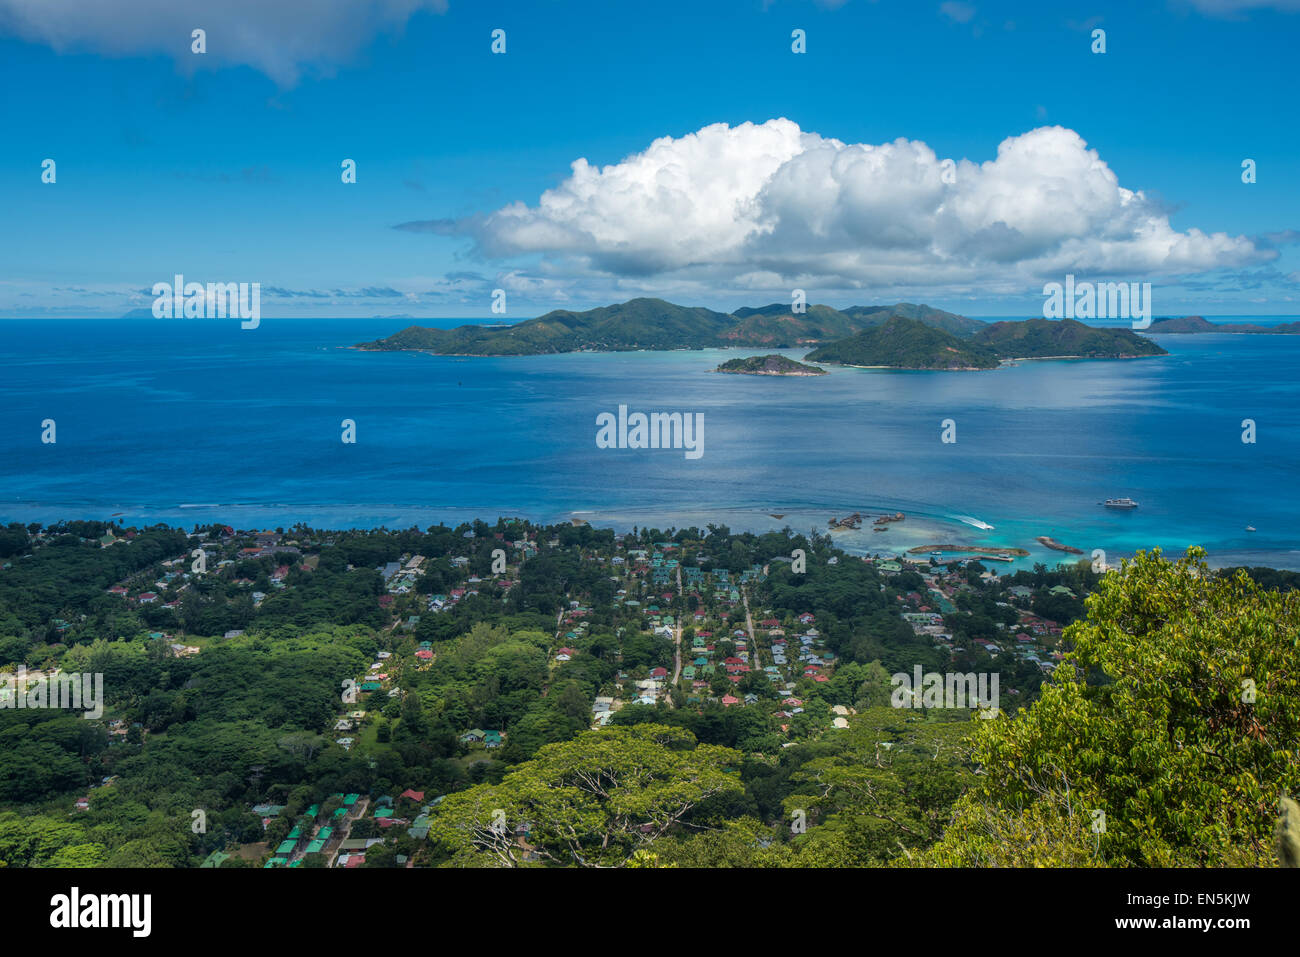 Panorama of La Digue island from Nid d’Aigle viewpoint, Seychelles Stock Photo